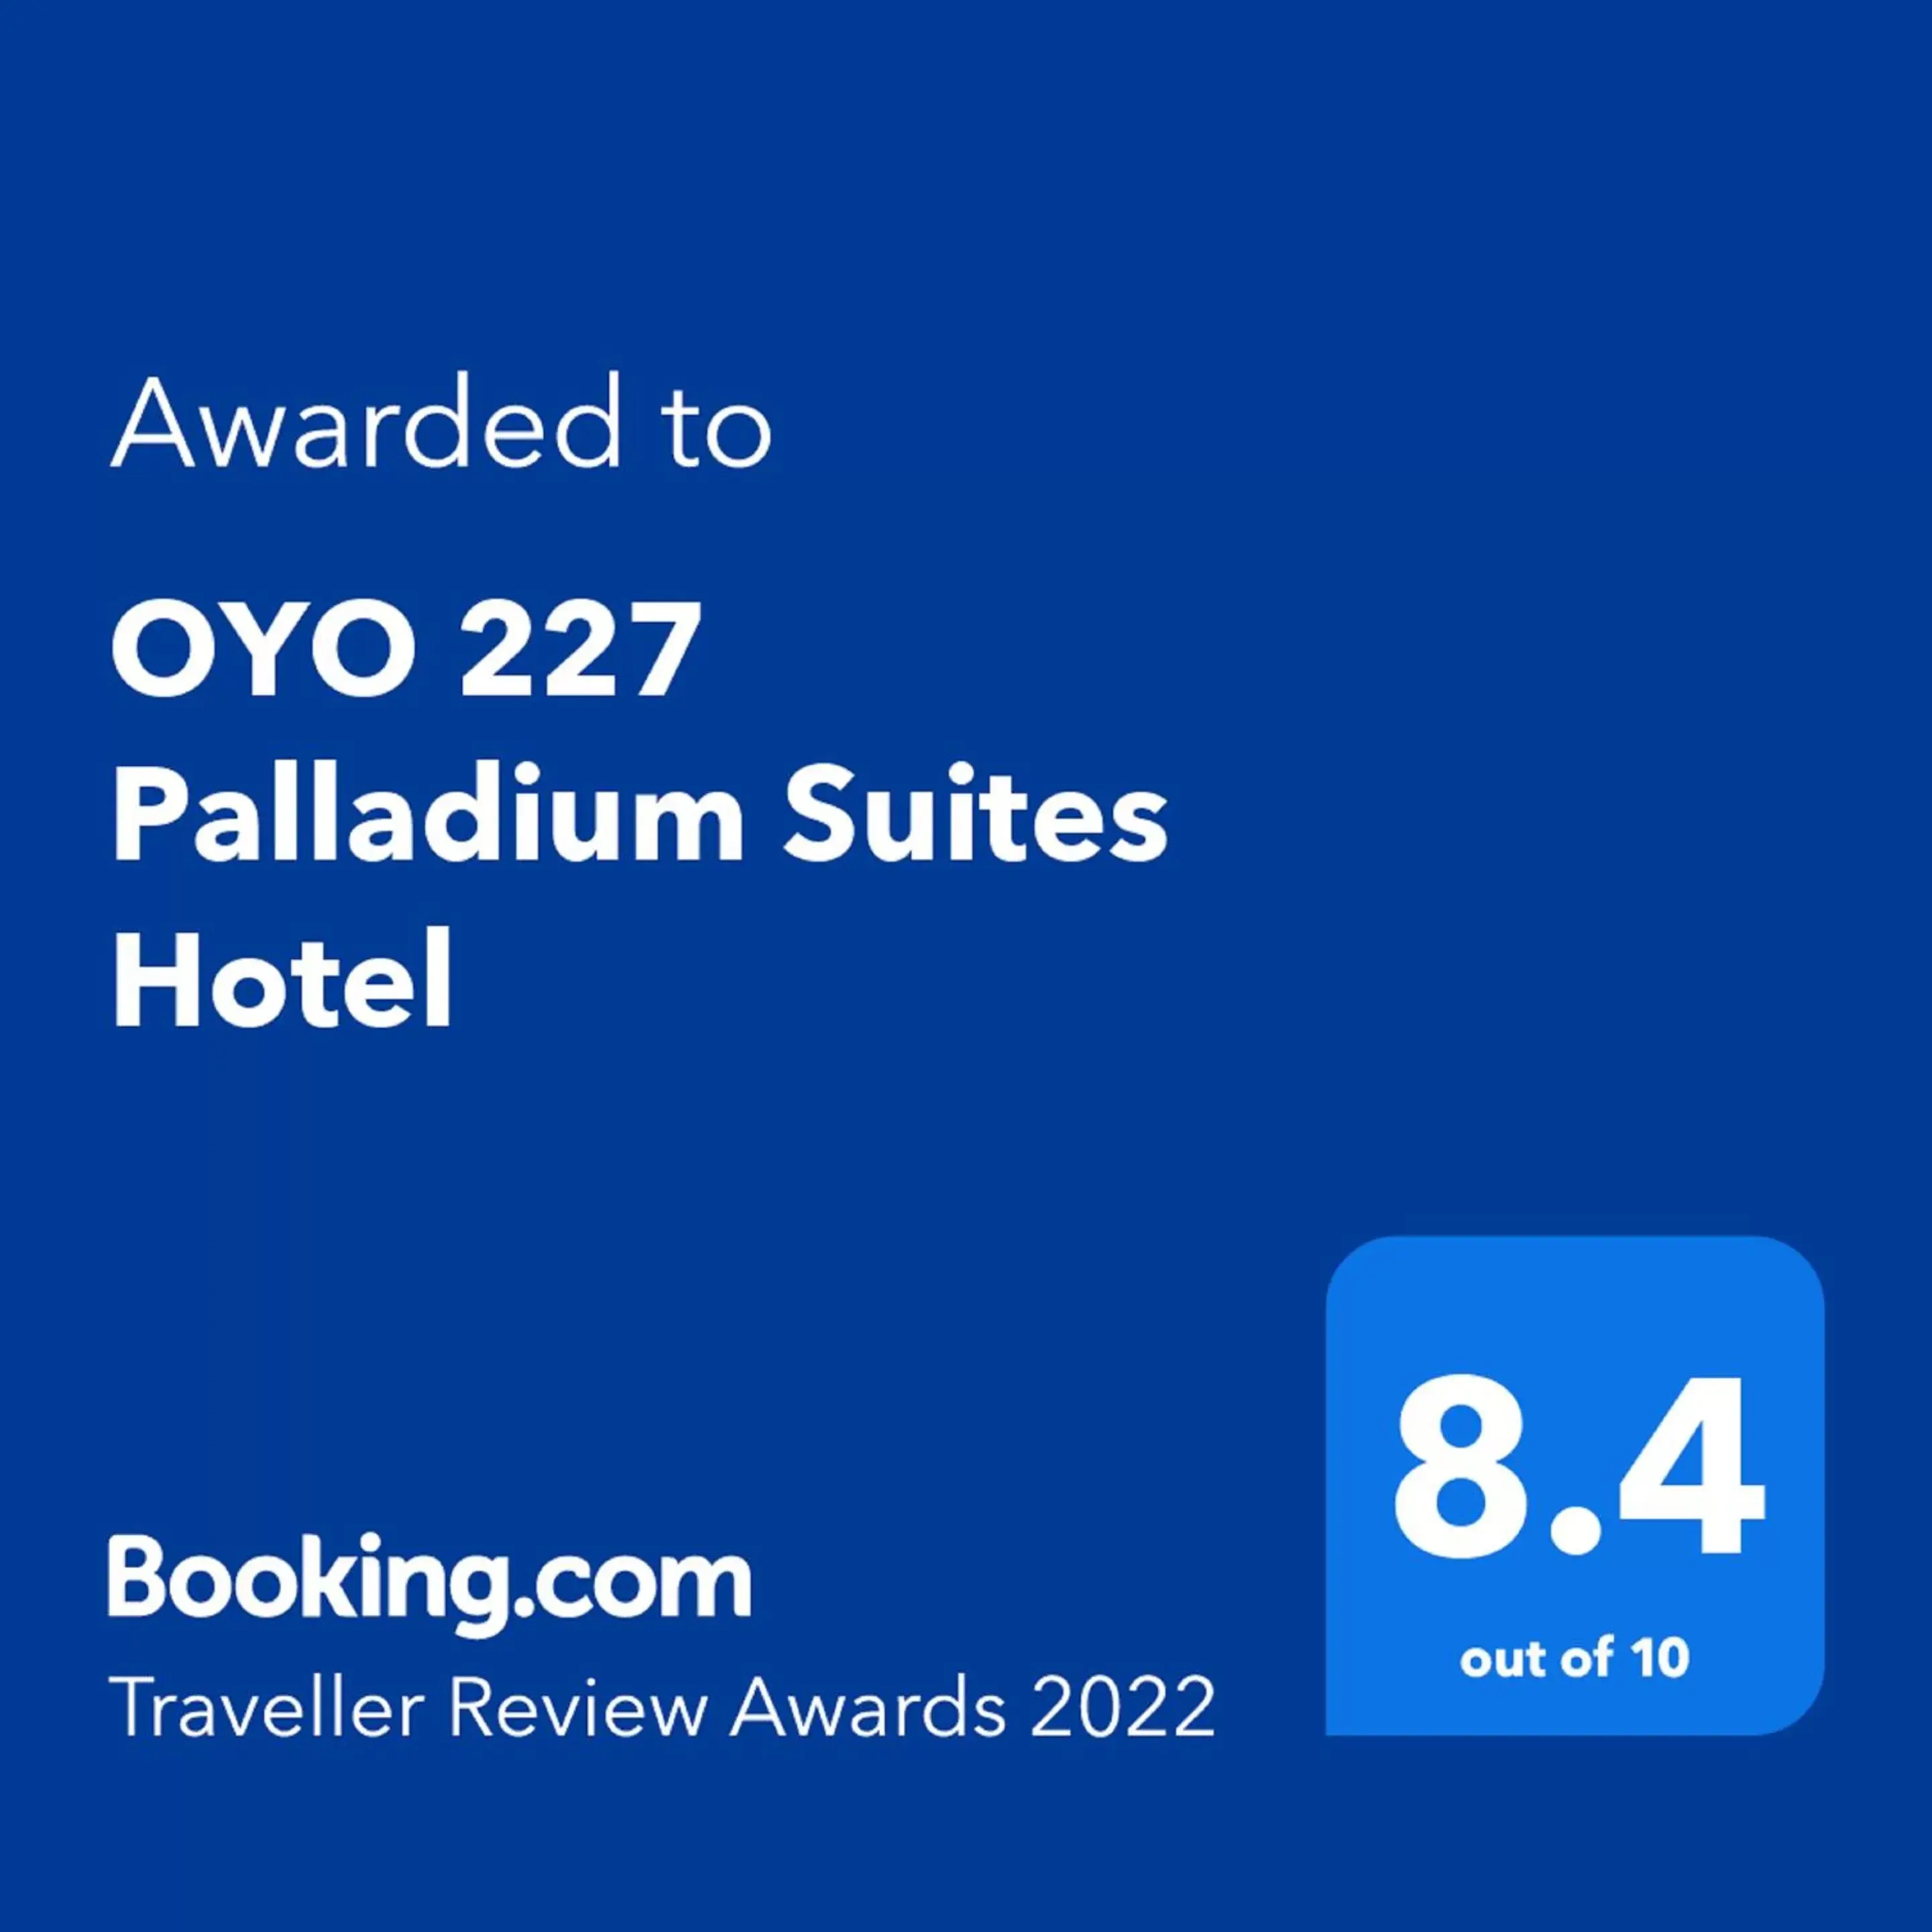 Other, Logo/Certificate/Sign/Award in OYO 227 Palladium Suites Hotel